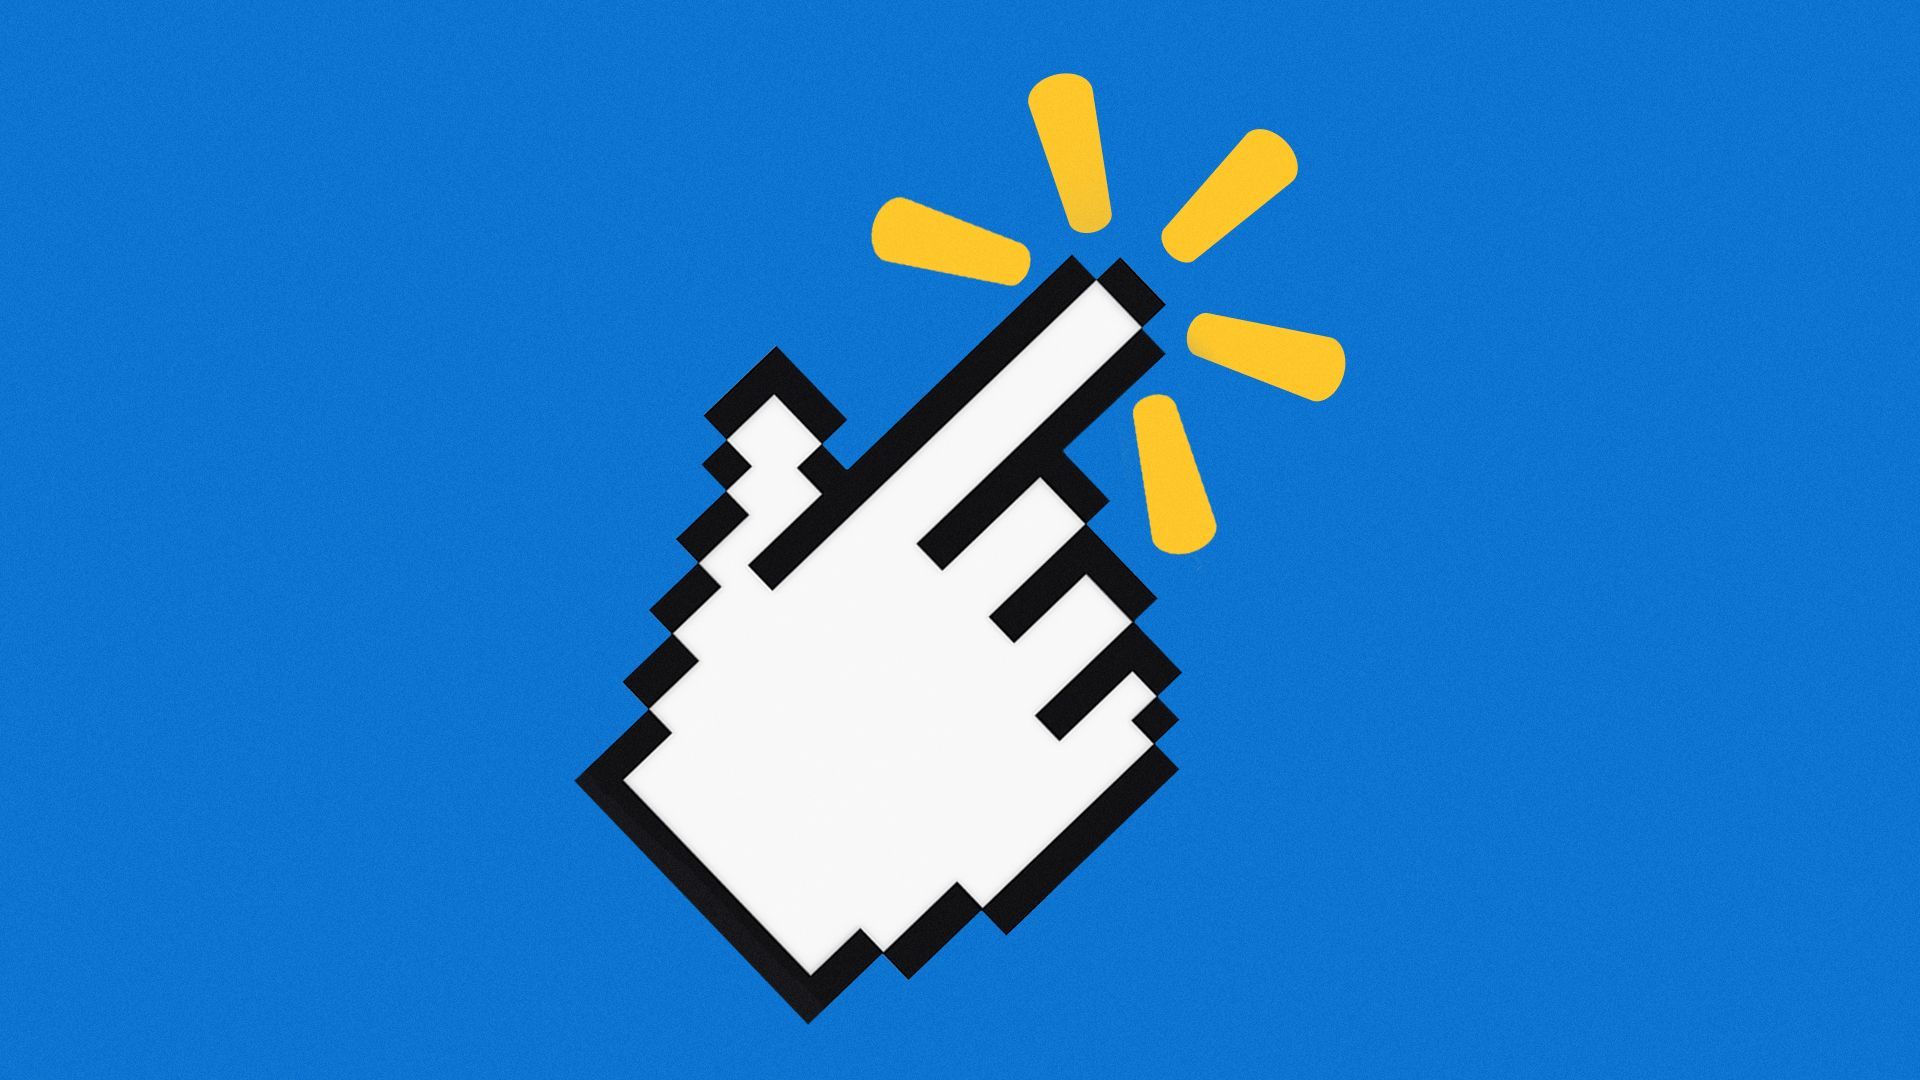 Illustration of a hand cursor with the Walmart logo above the index finger.